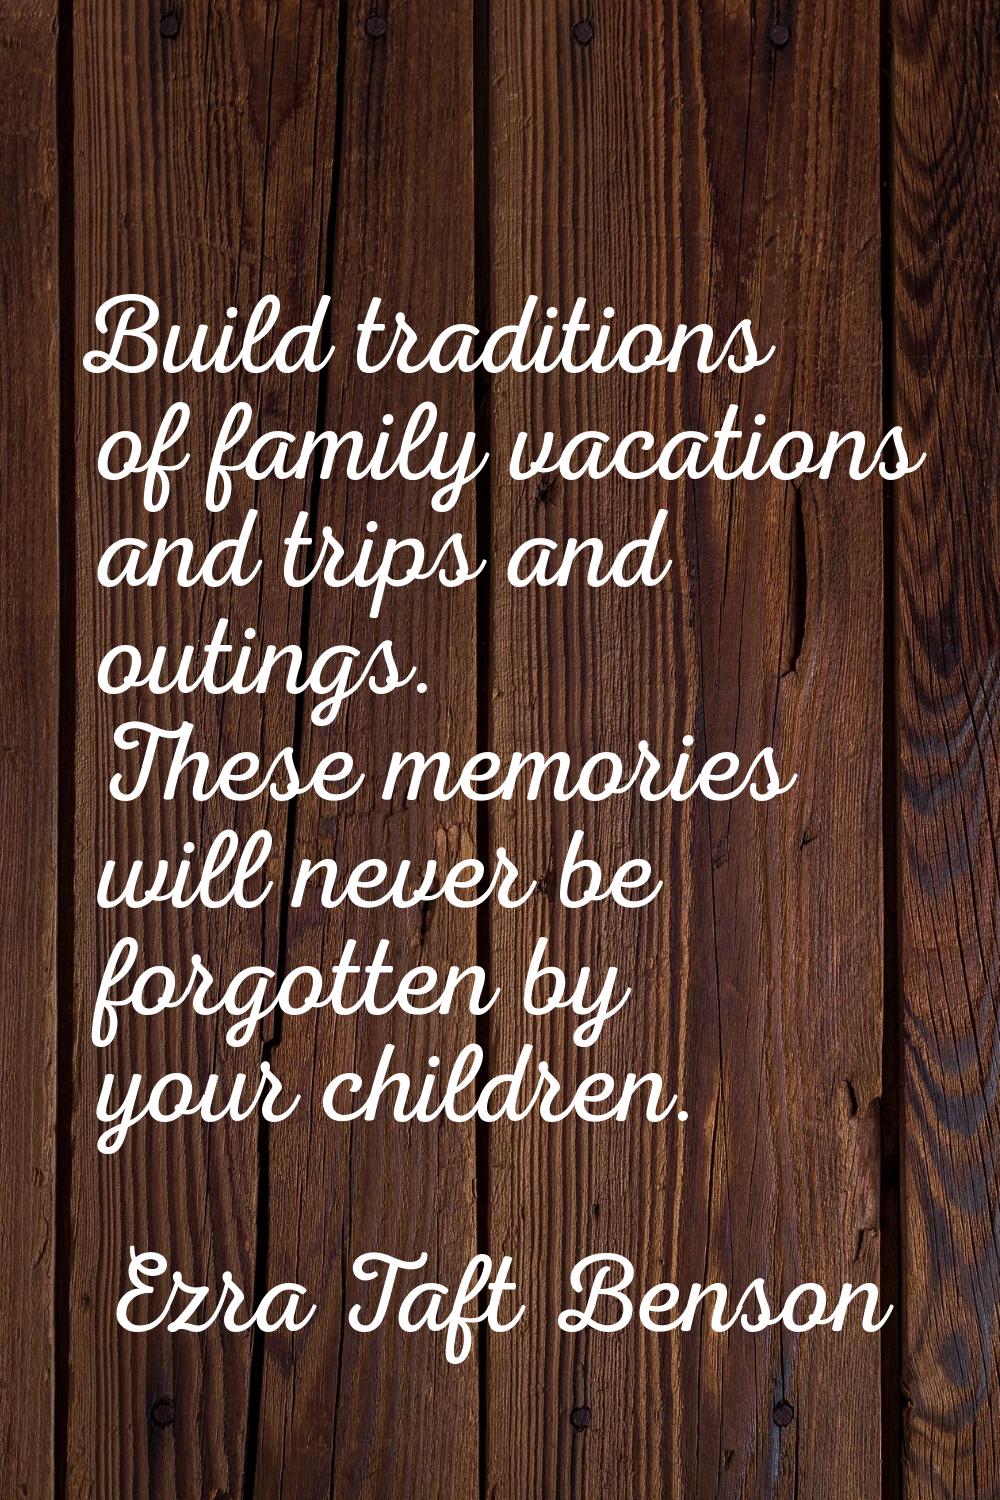 Build traditions of family vacations and trips and outings. These memories will never be forgotten 